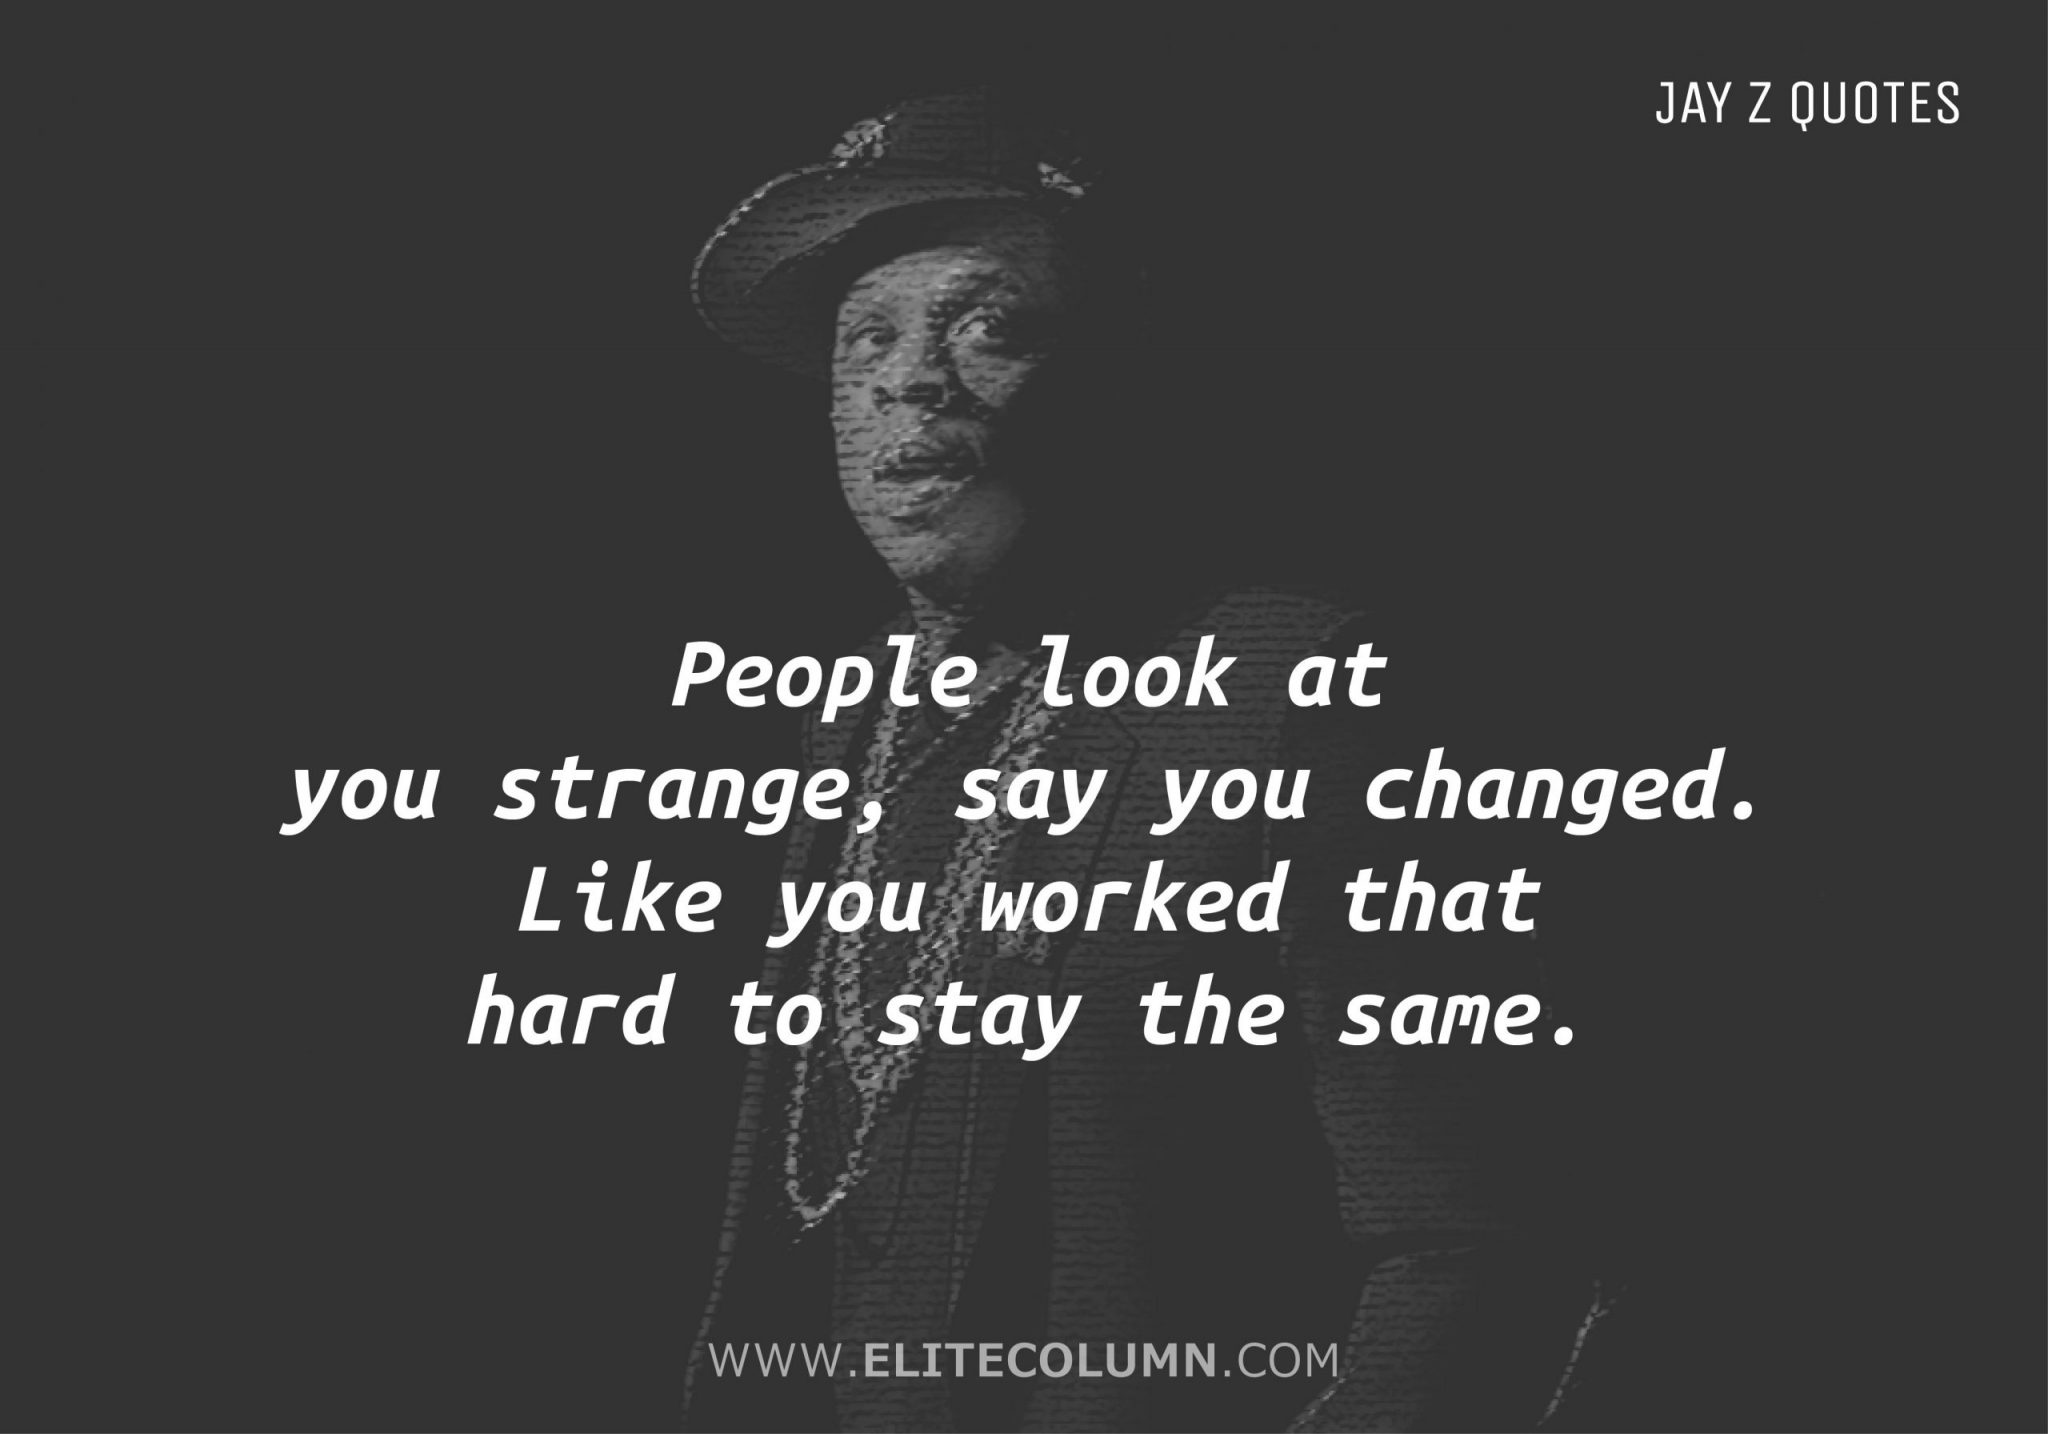 jay z motivational quotes